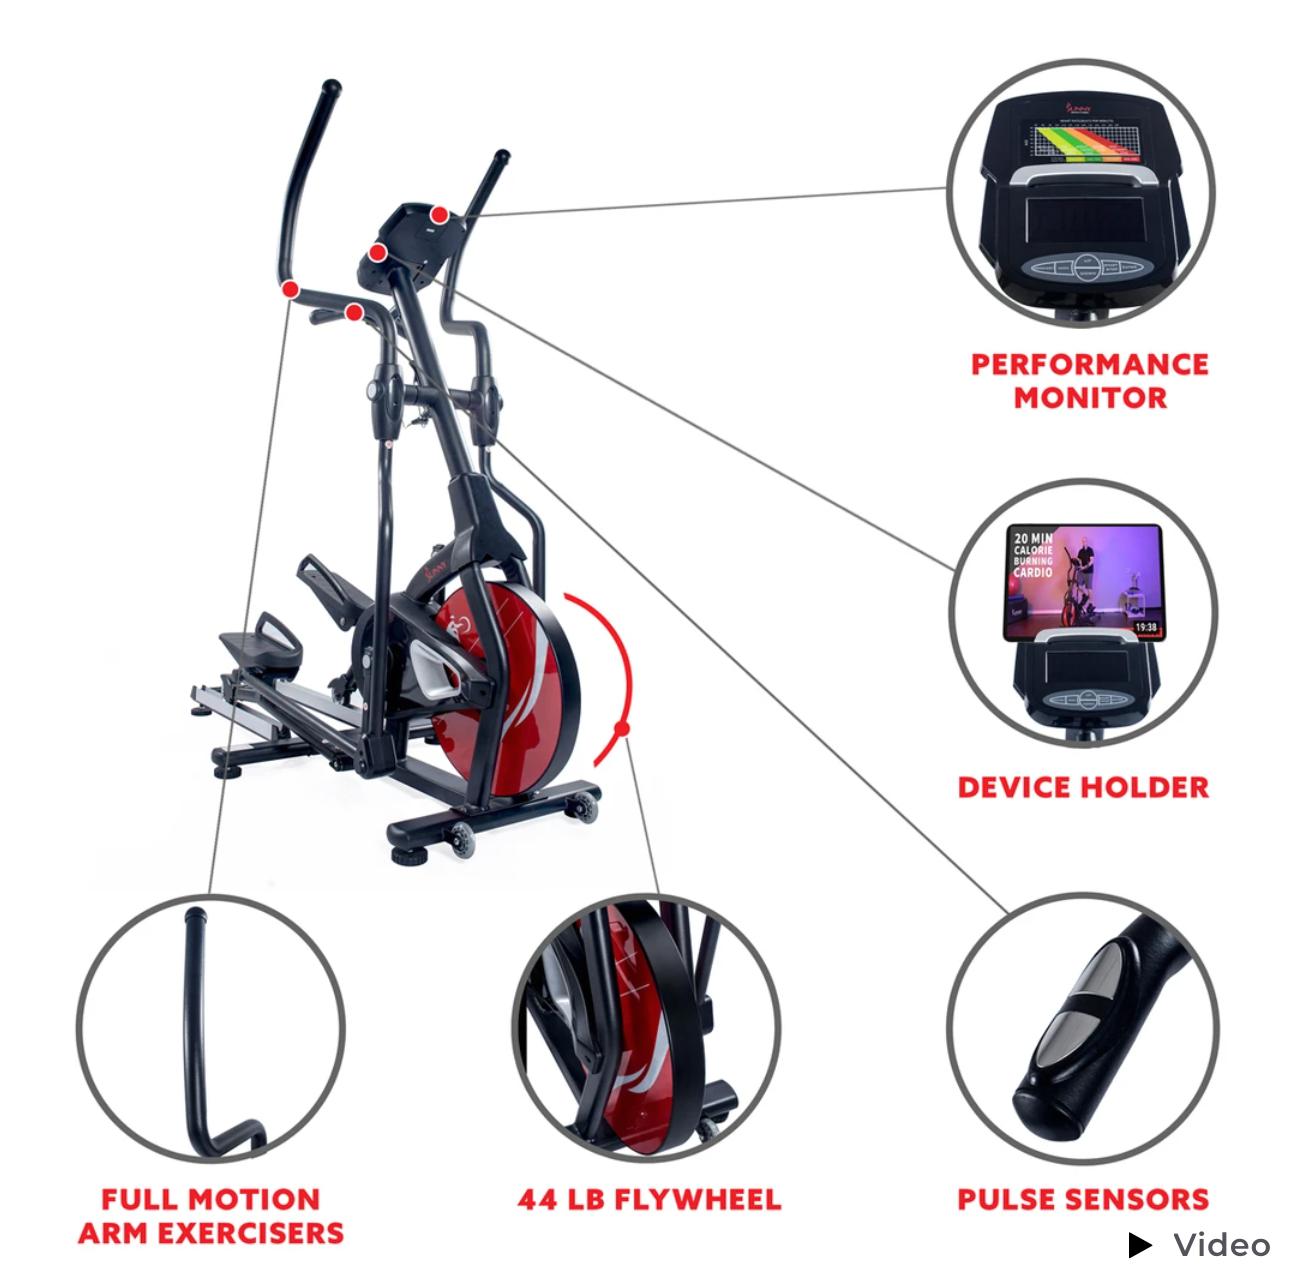 Stride with the Elliptical Machine Magnetic Fitness SF-E3865 with Device Holder, LCD Monitor and Heart Rate Monitoring Features